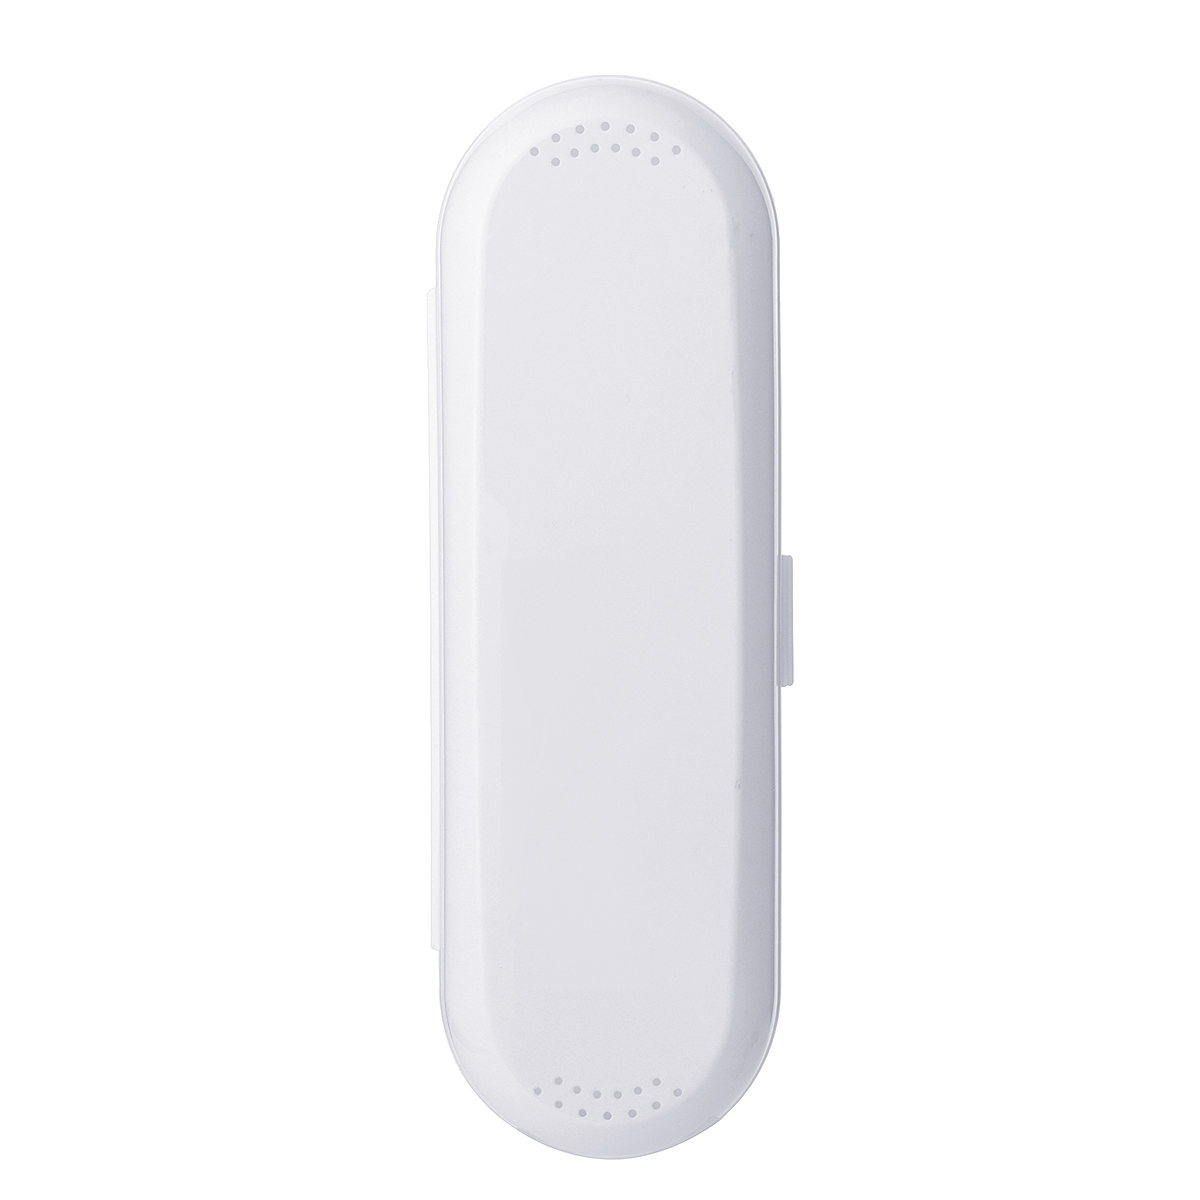 Original-Environment-Friendly-PVC-SOOCARE-Electric-Toothbrush-Holder-Case-WHITE-For-SOOCARE-SOOCAS-X-1361687-8